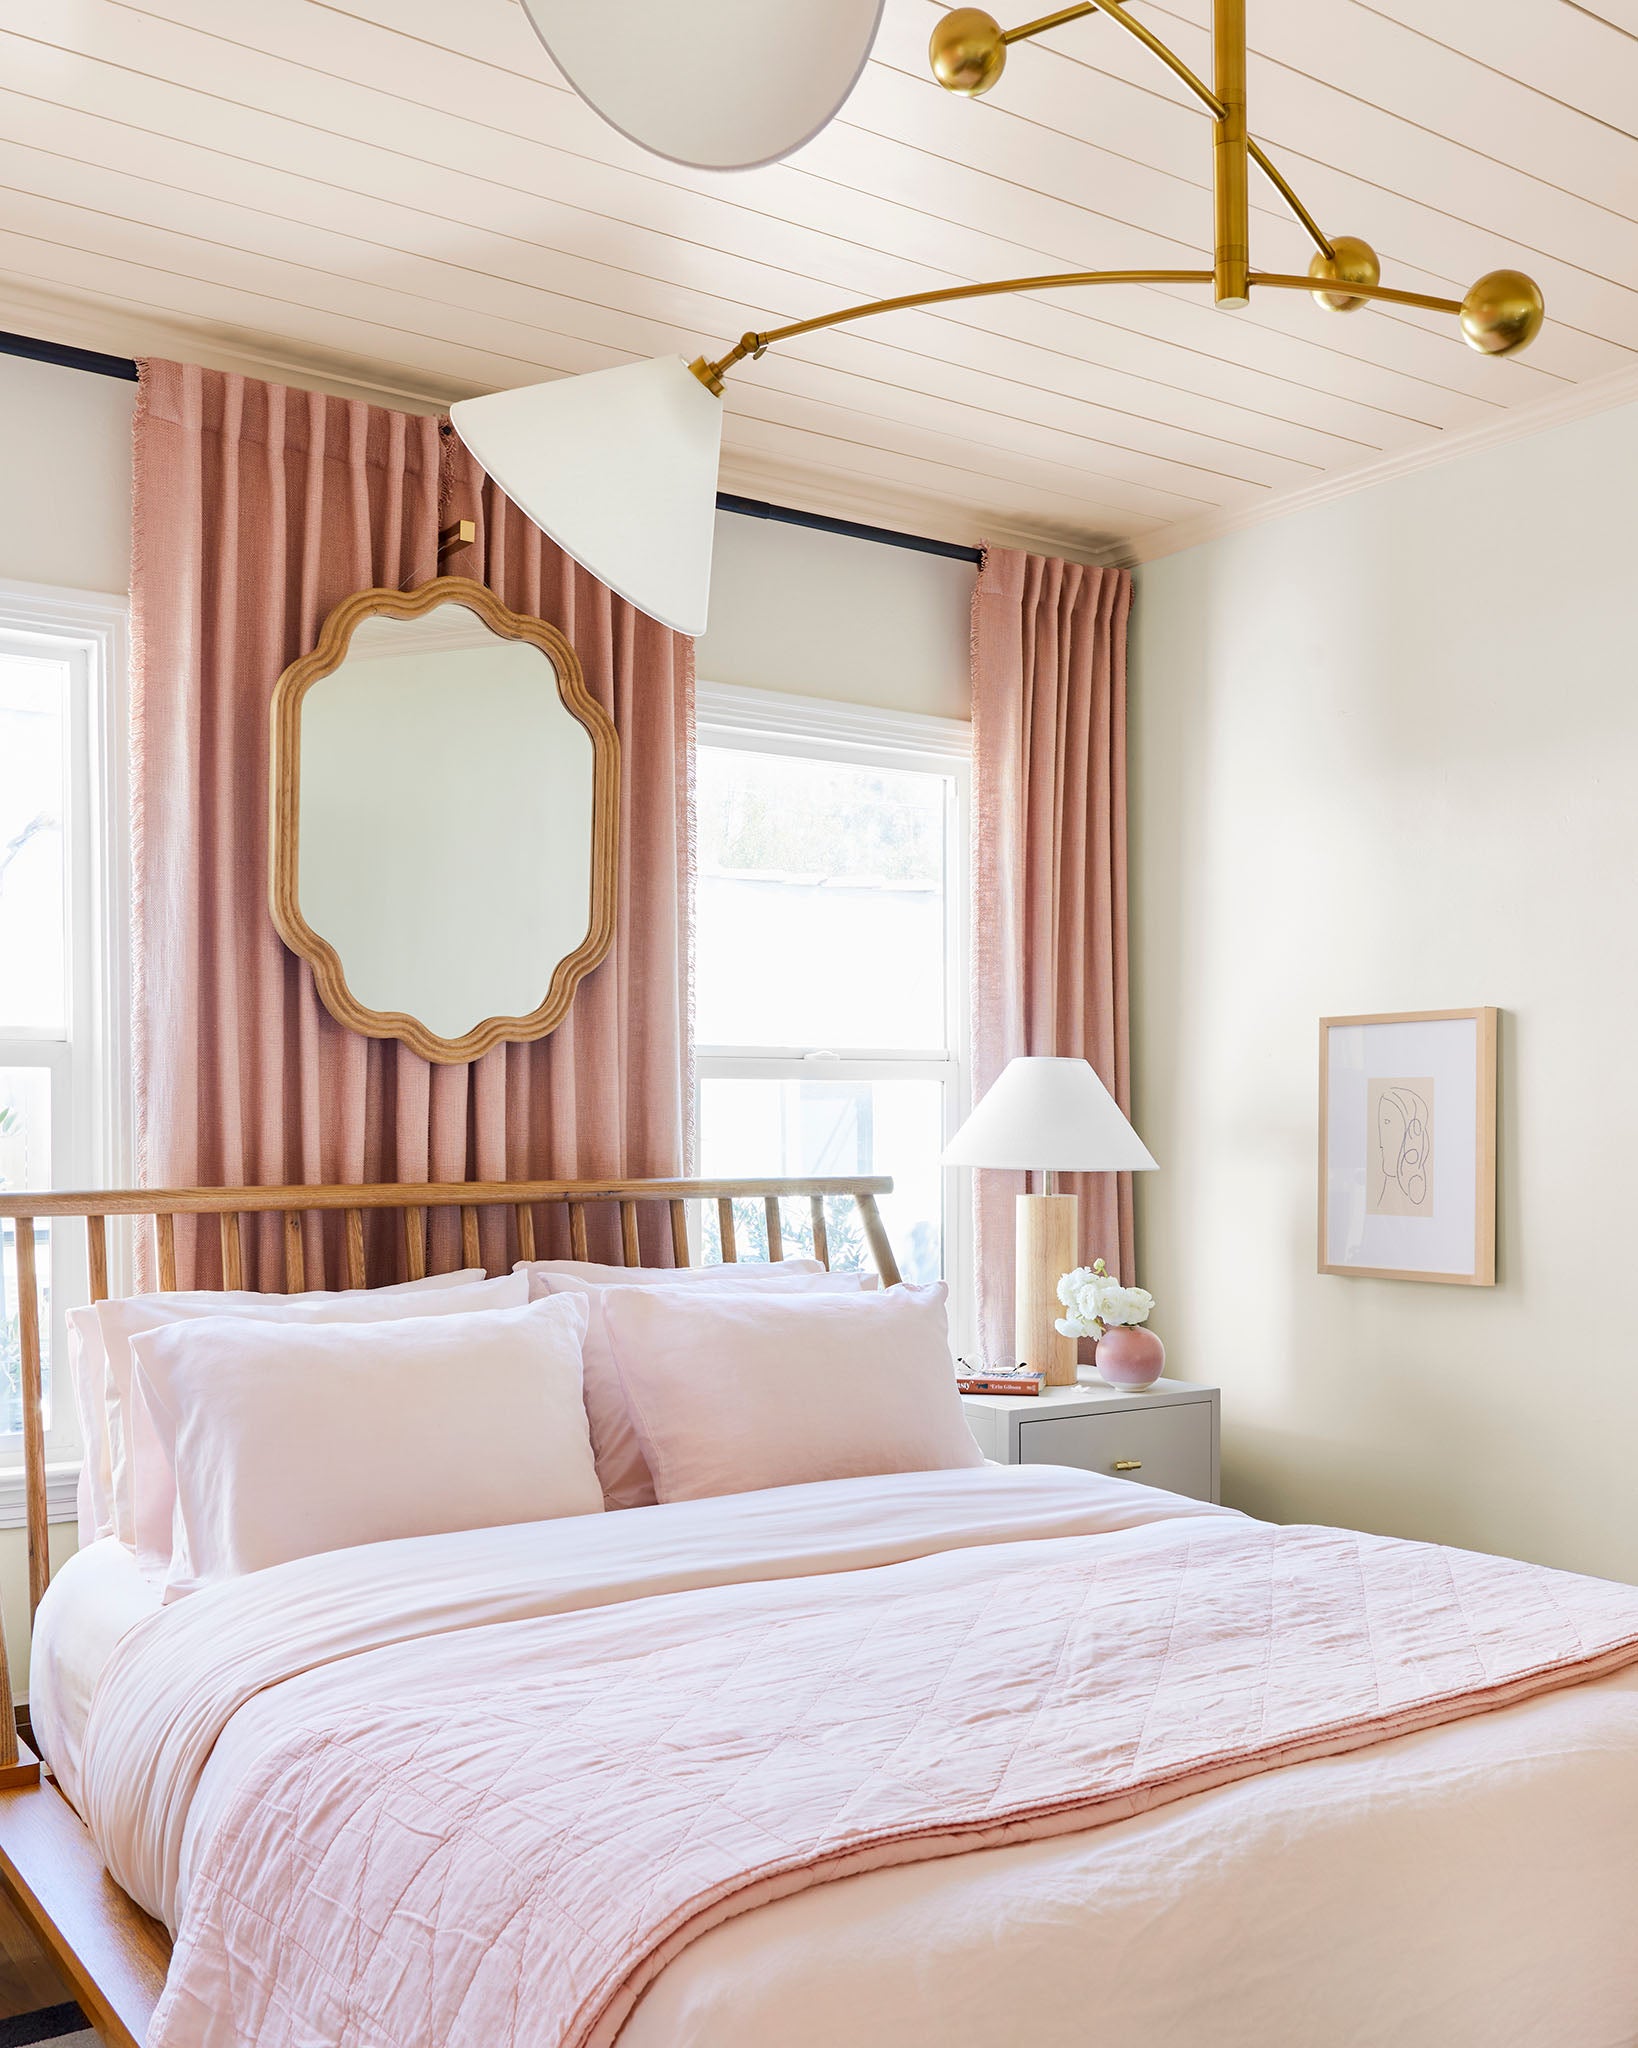 Piling on pink textiles, in addition to painting the ceiling a color, creates an intentional look.